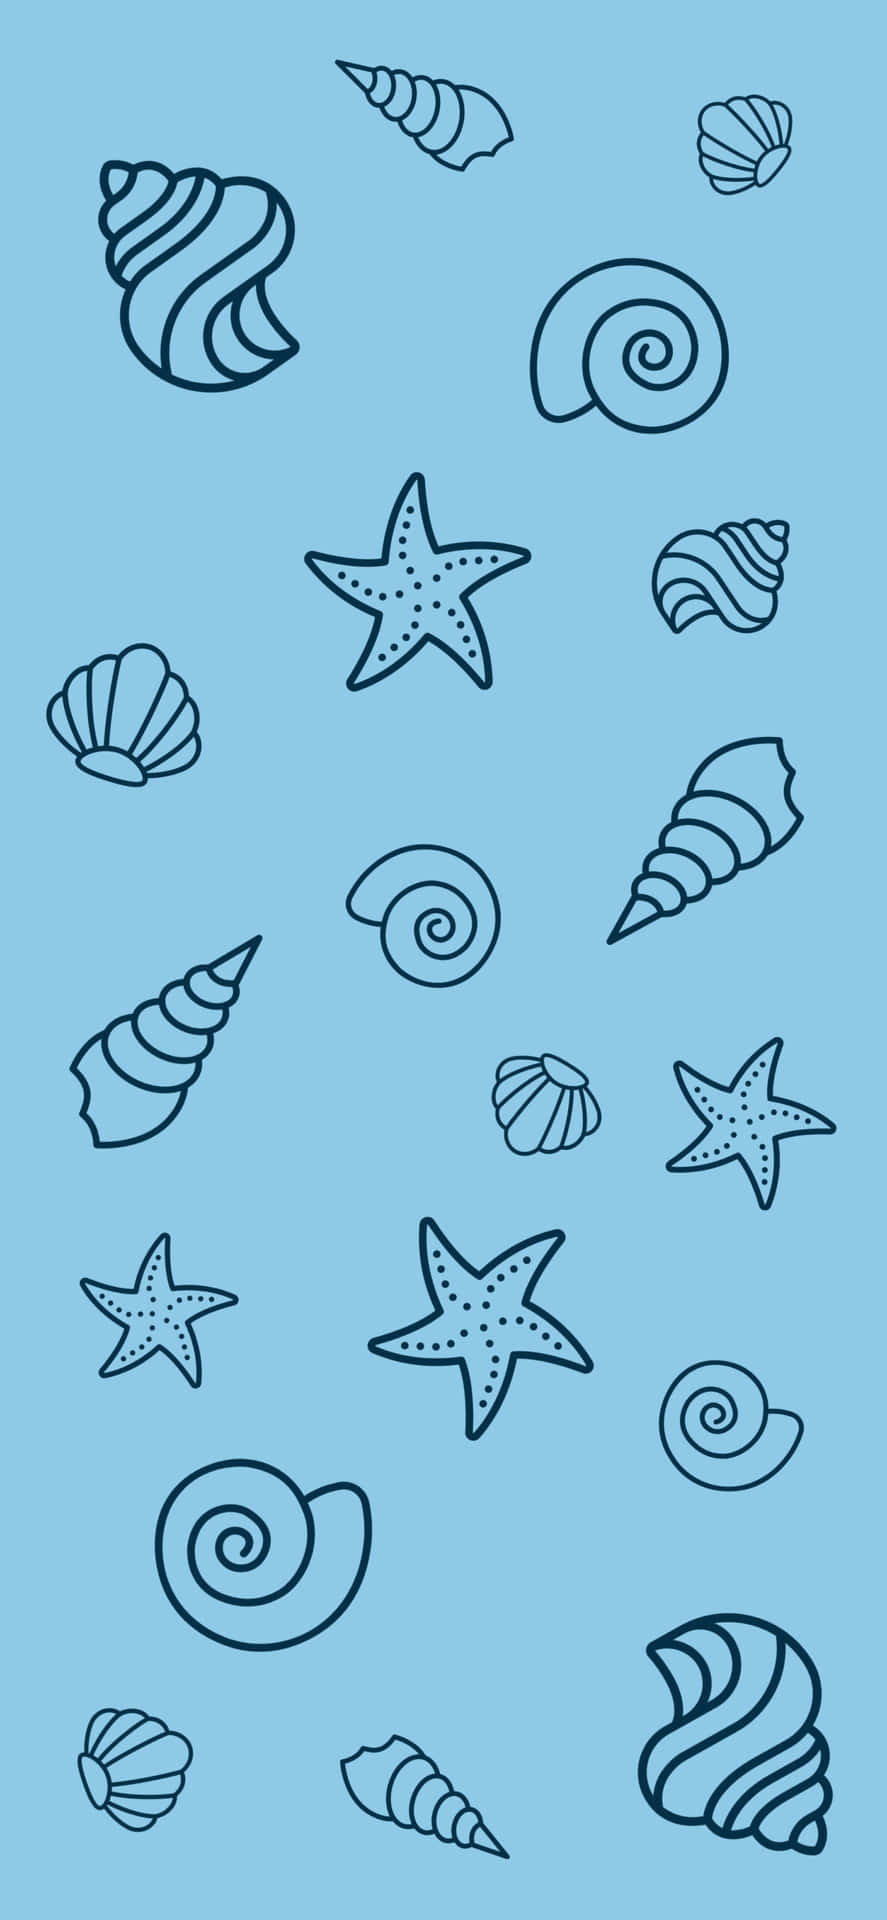 Blue Aesthetic Background With Cute Seashell Pattern